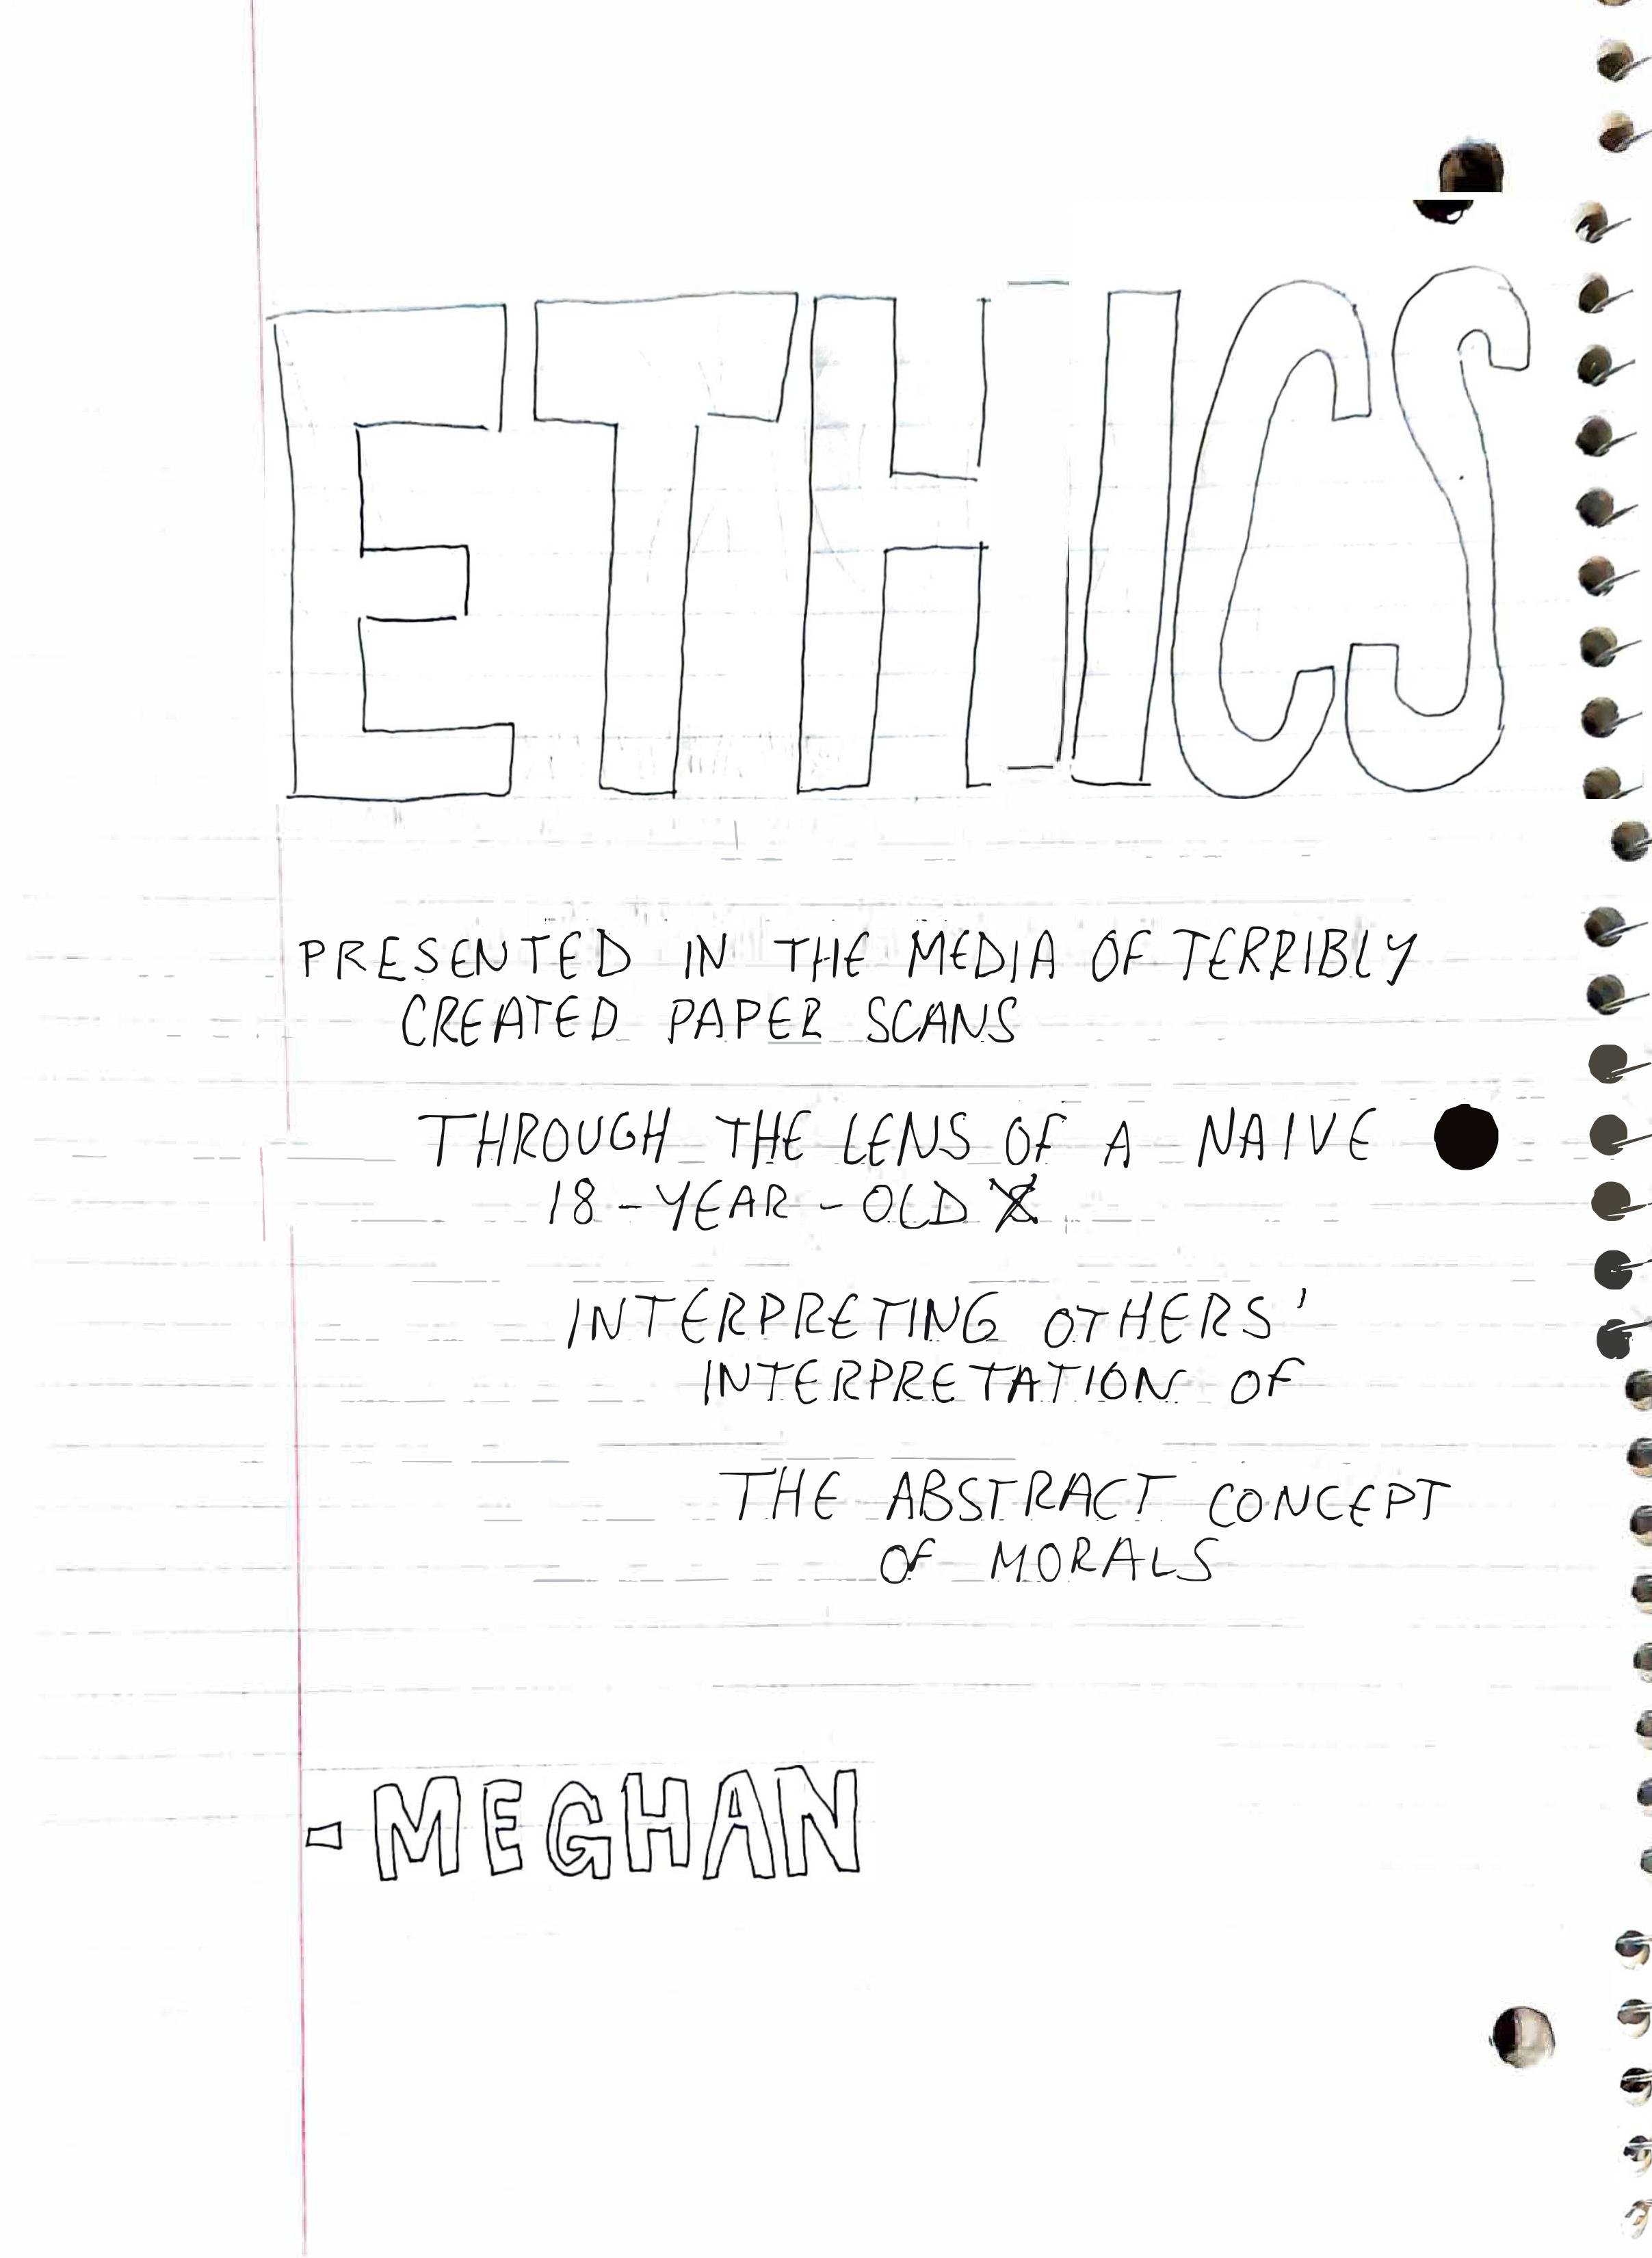 Ethics: Presented in the Media of Terribly Created Paper Scans